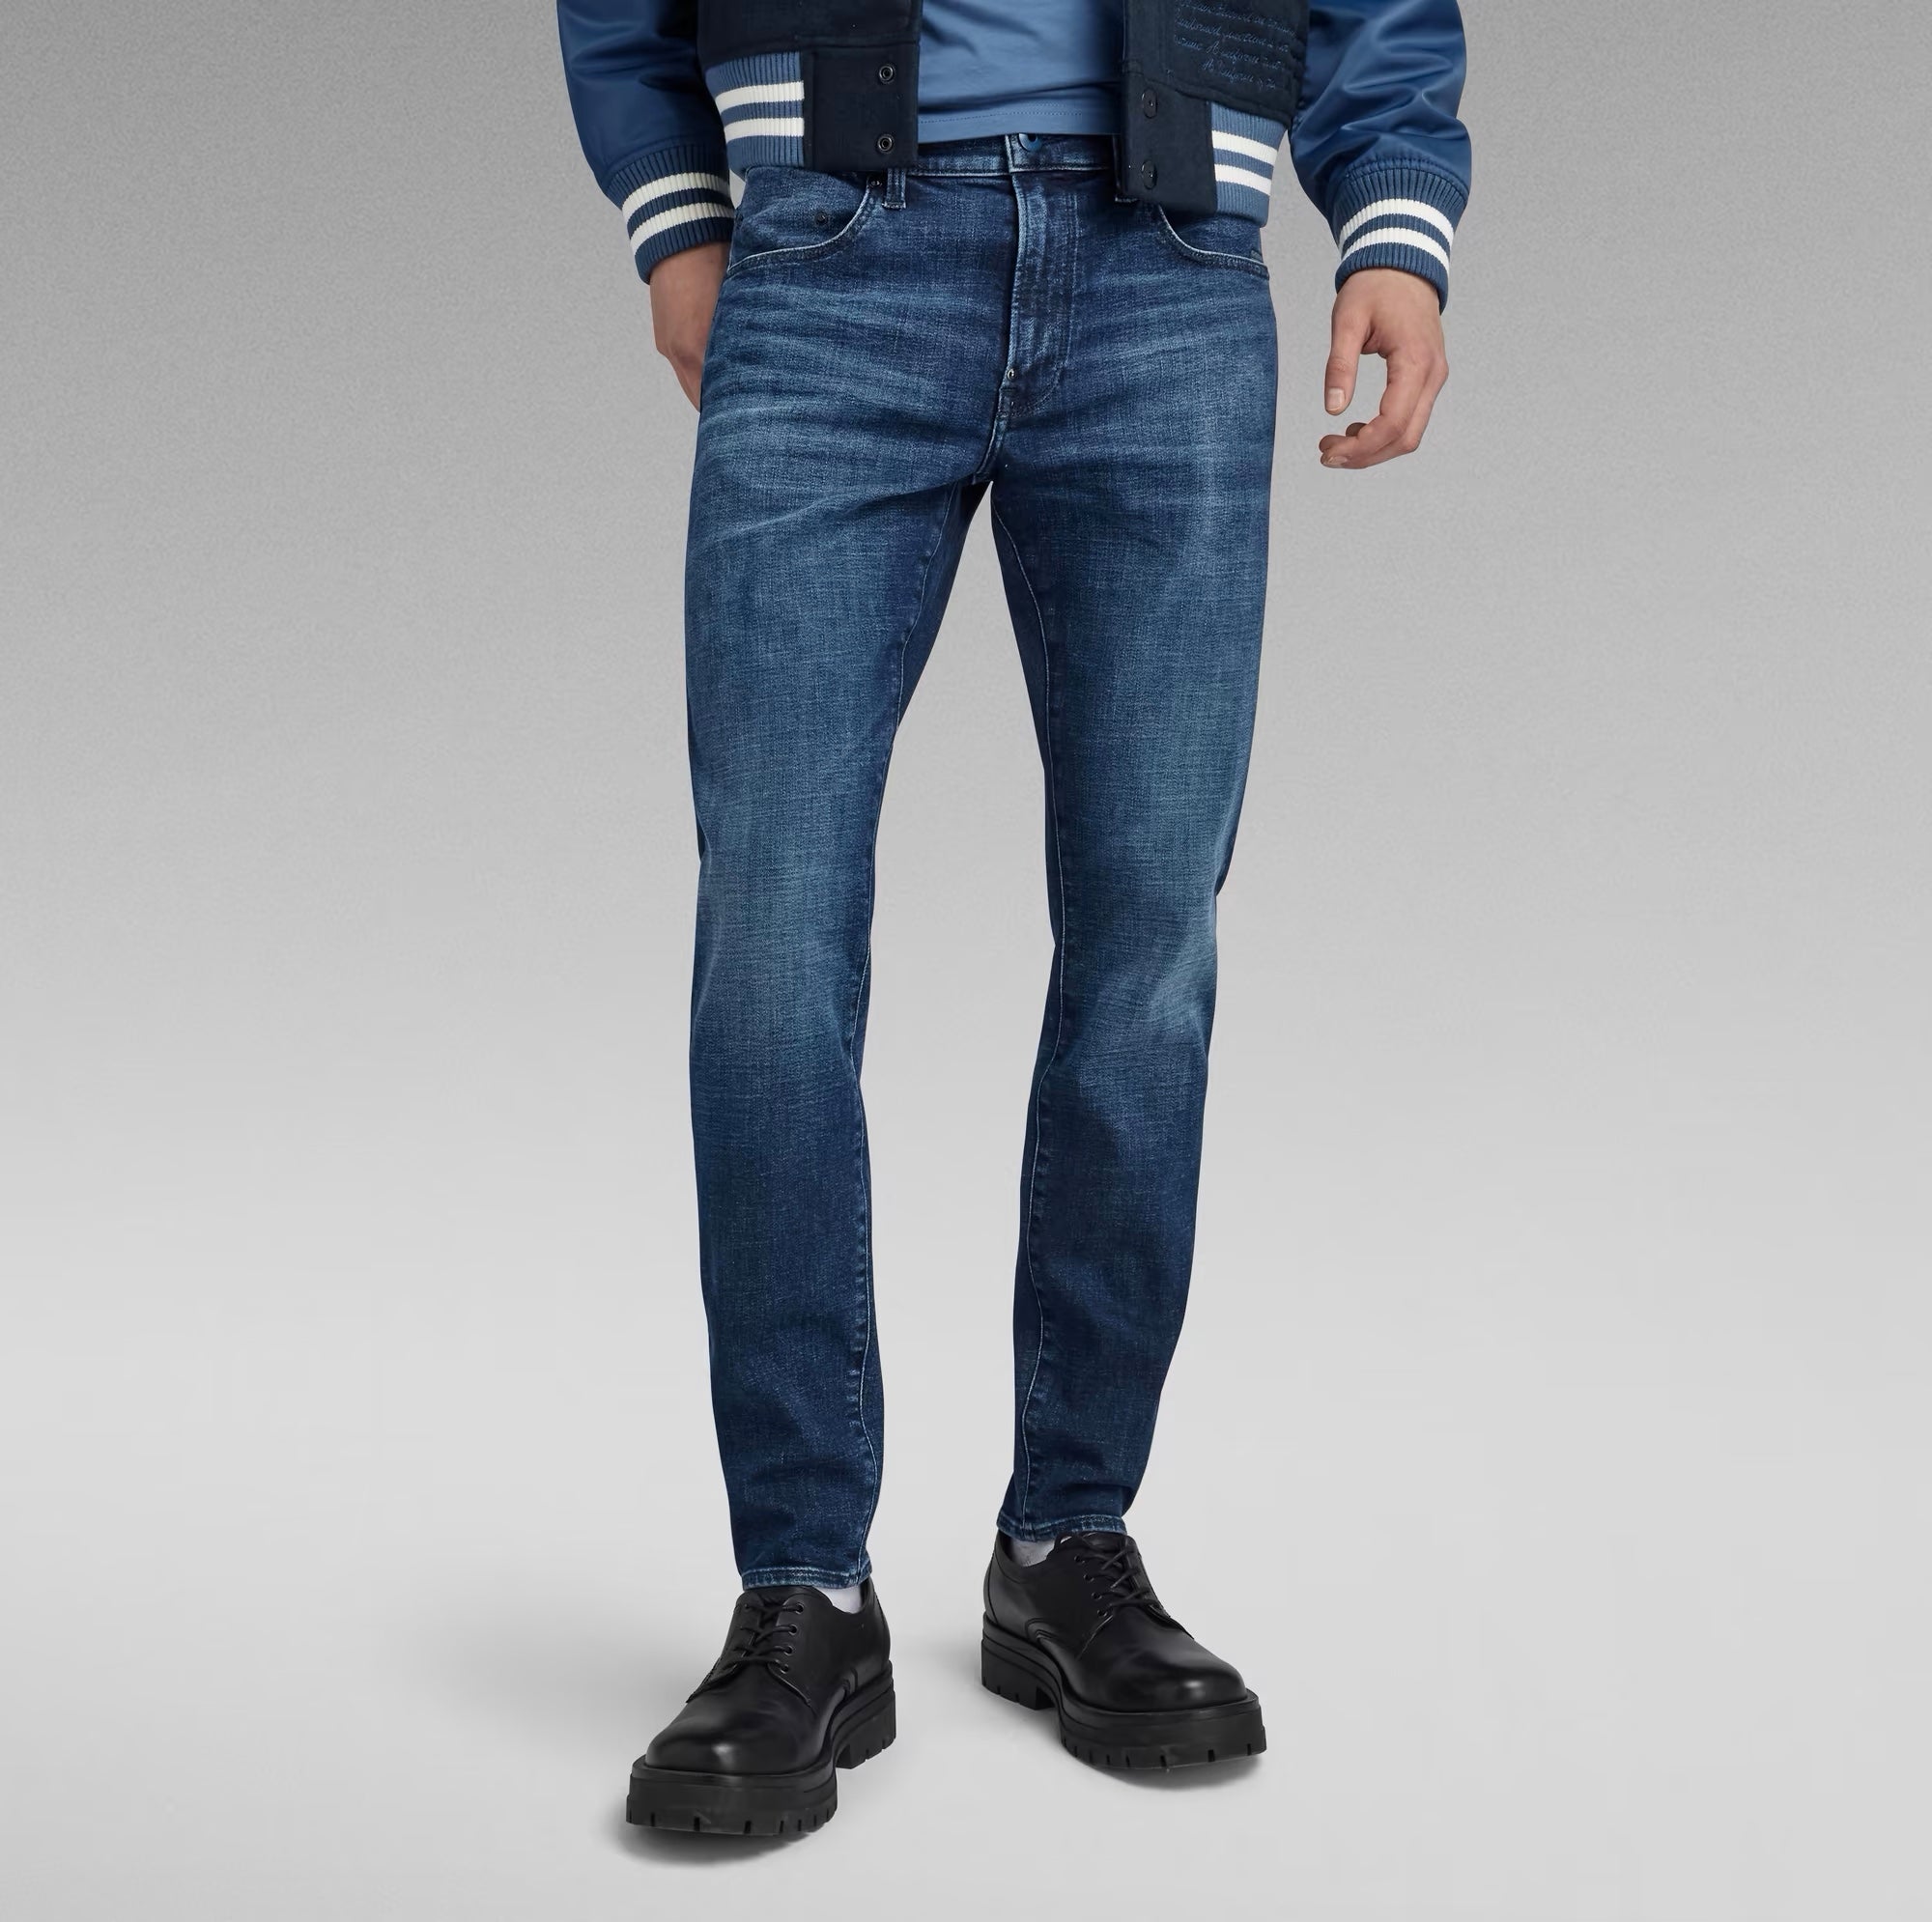 Revend FWD Skinny Jeans Worn in Himalayan Blue